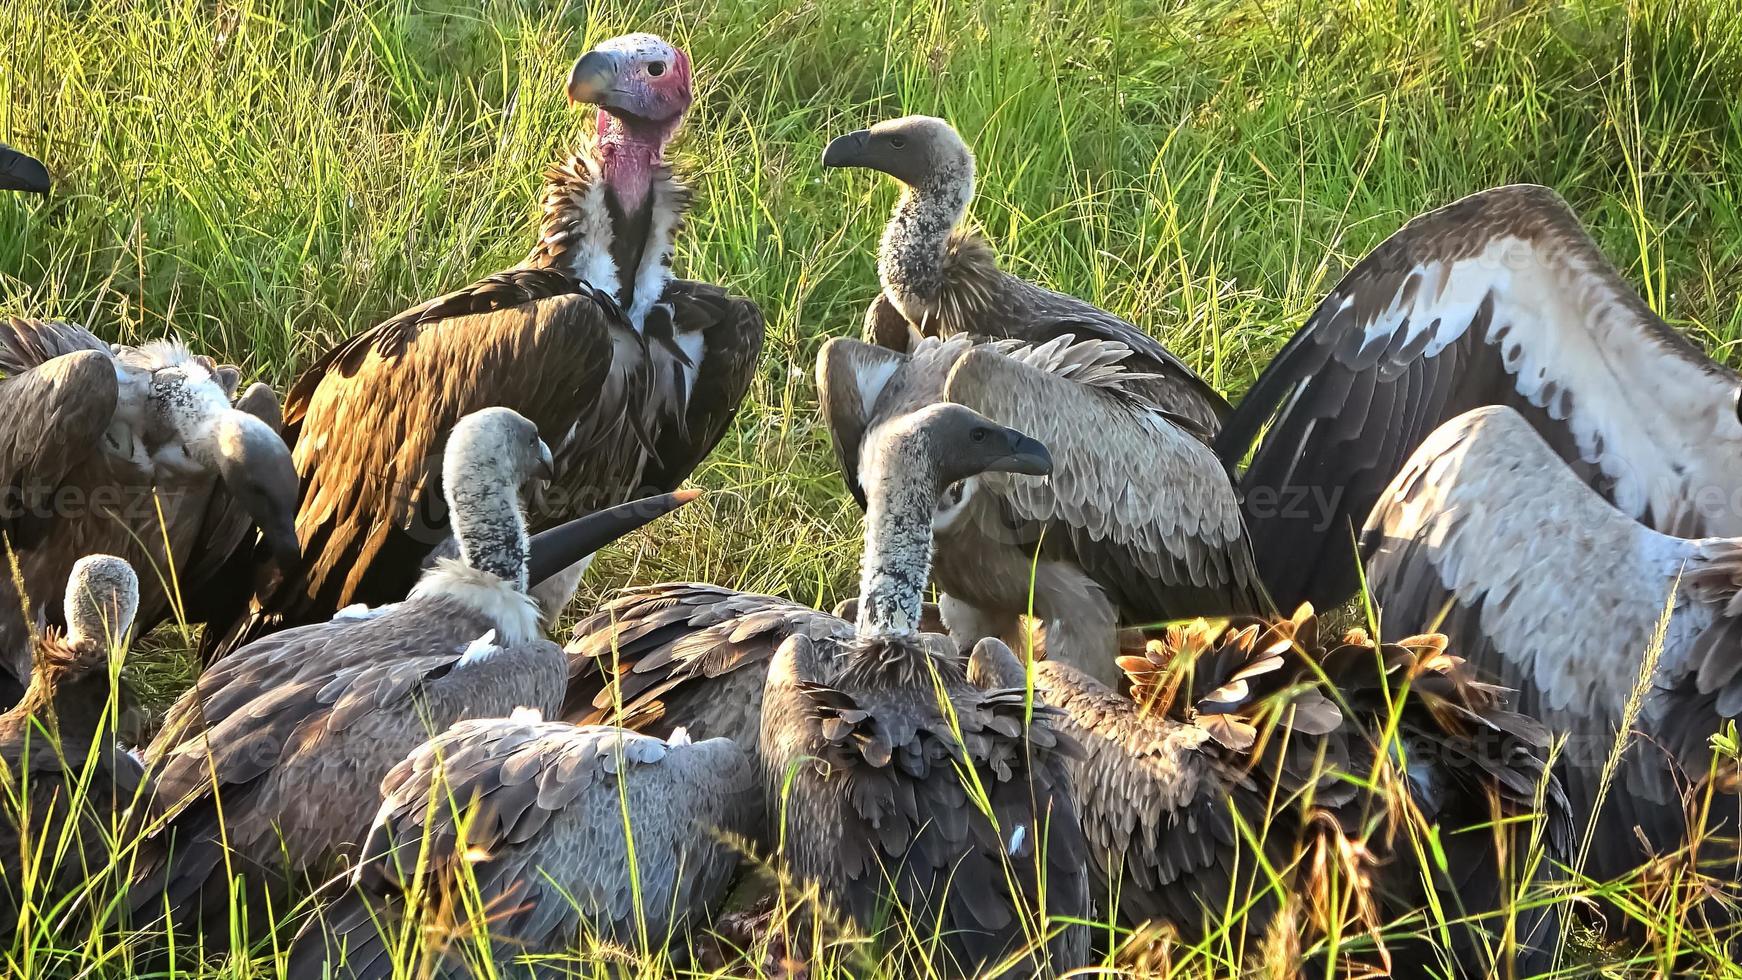 Numerous vultures fight over a carcass in the wilds of Africa. photo